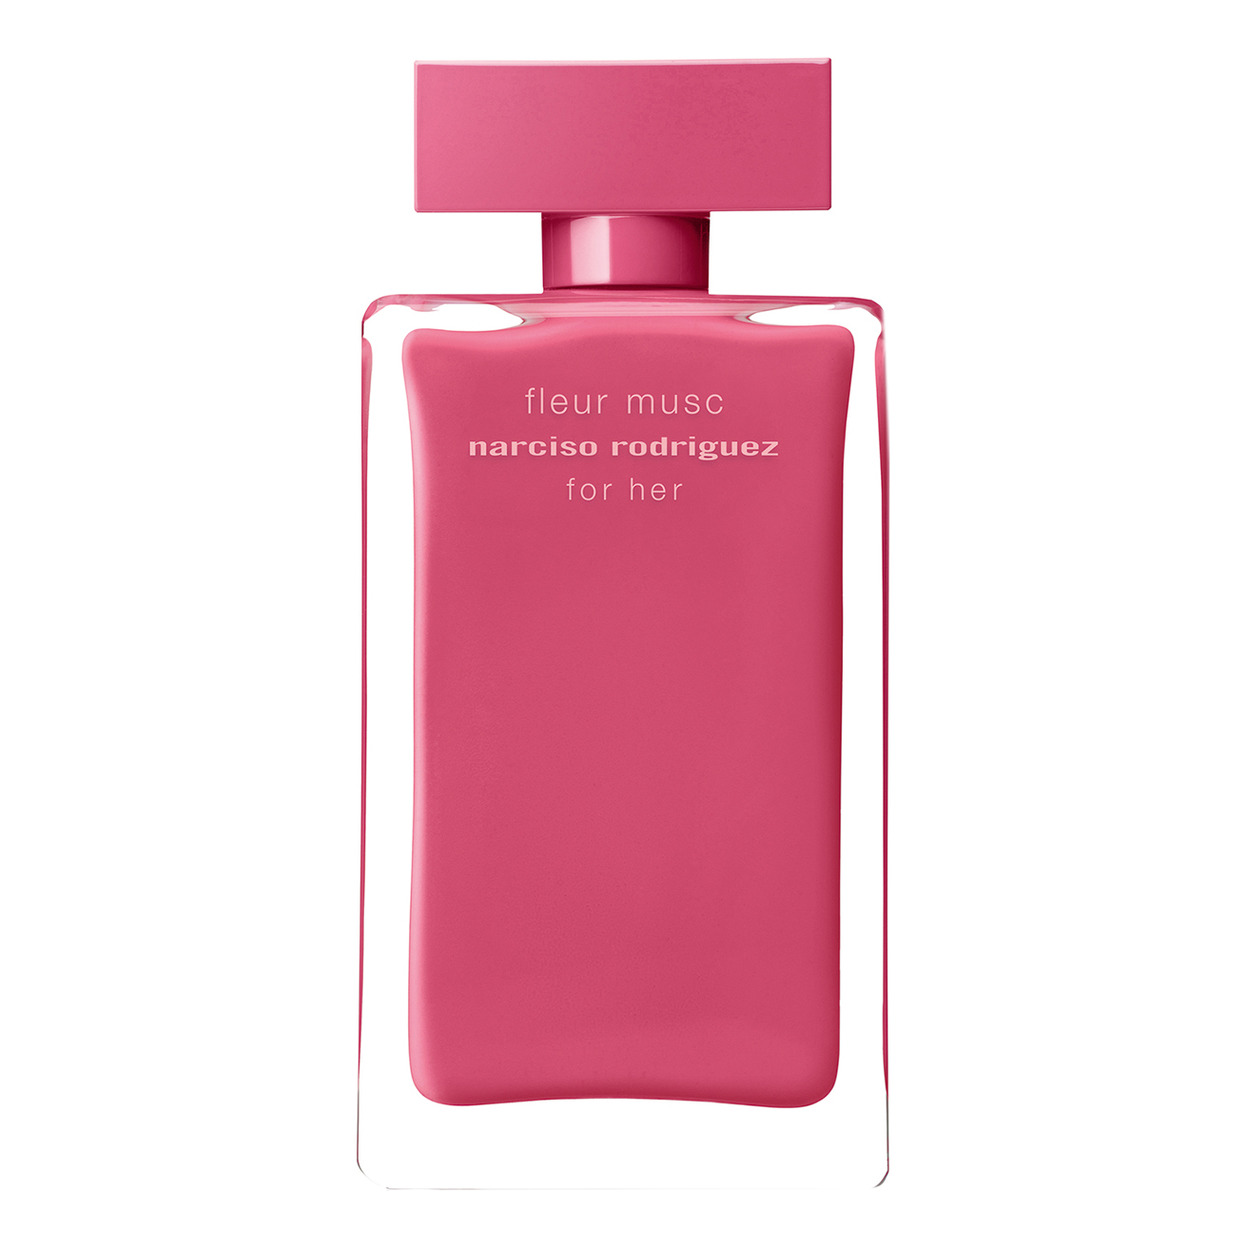 Туалетная вода нарциссо родригес. Narciso Rodriguez for her fleur Musk. Fleur Musc Narciso Rodriguez for her. Narciso Rodriguez fleur Musc for her EDT, 100 ml. Narciso Rodriguez for her 100ml.